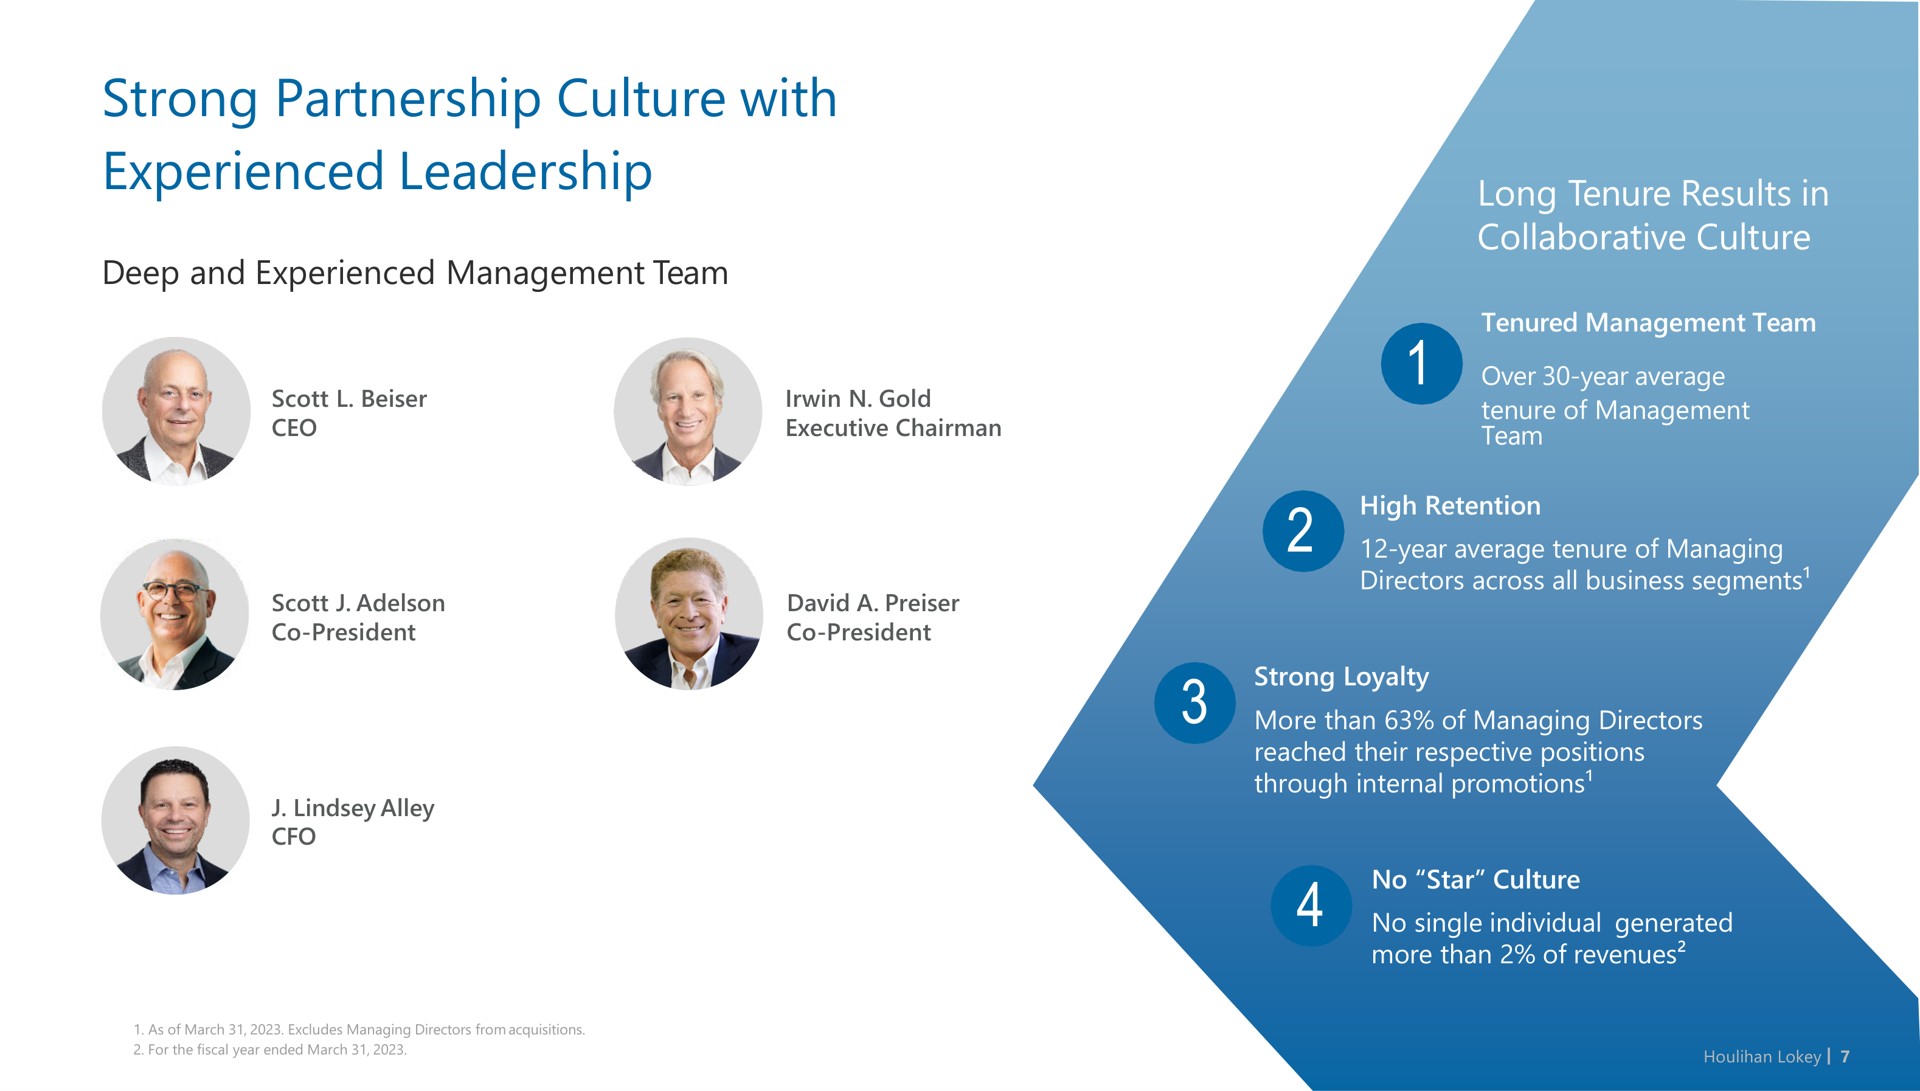 strong partnership culture with experienced leadership deep and experienced management team long tenure results in collaborative culture | Houlihan Lokey